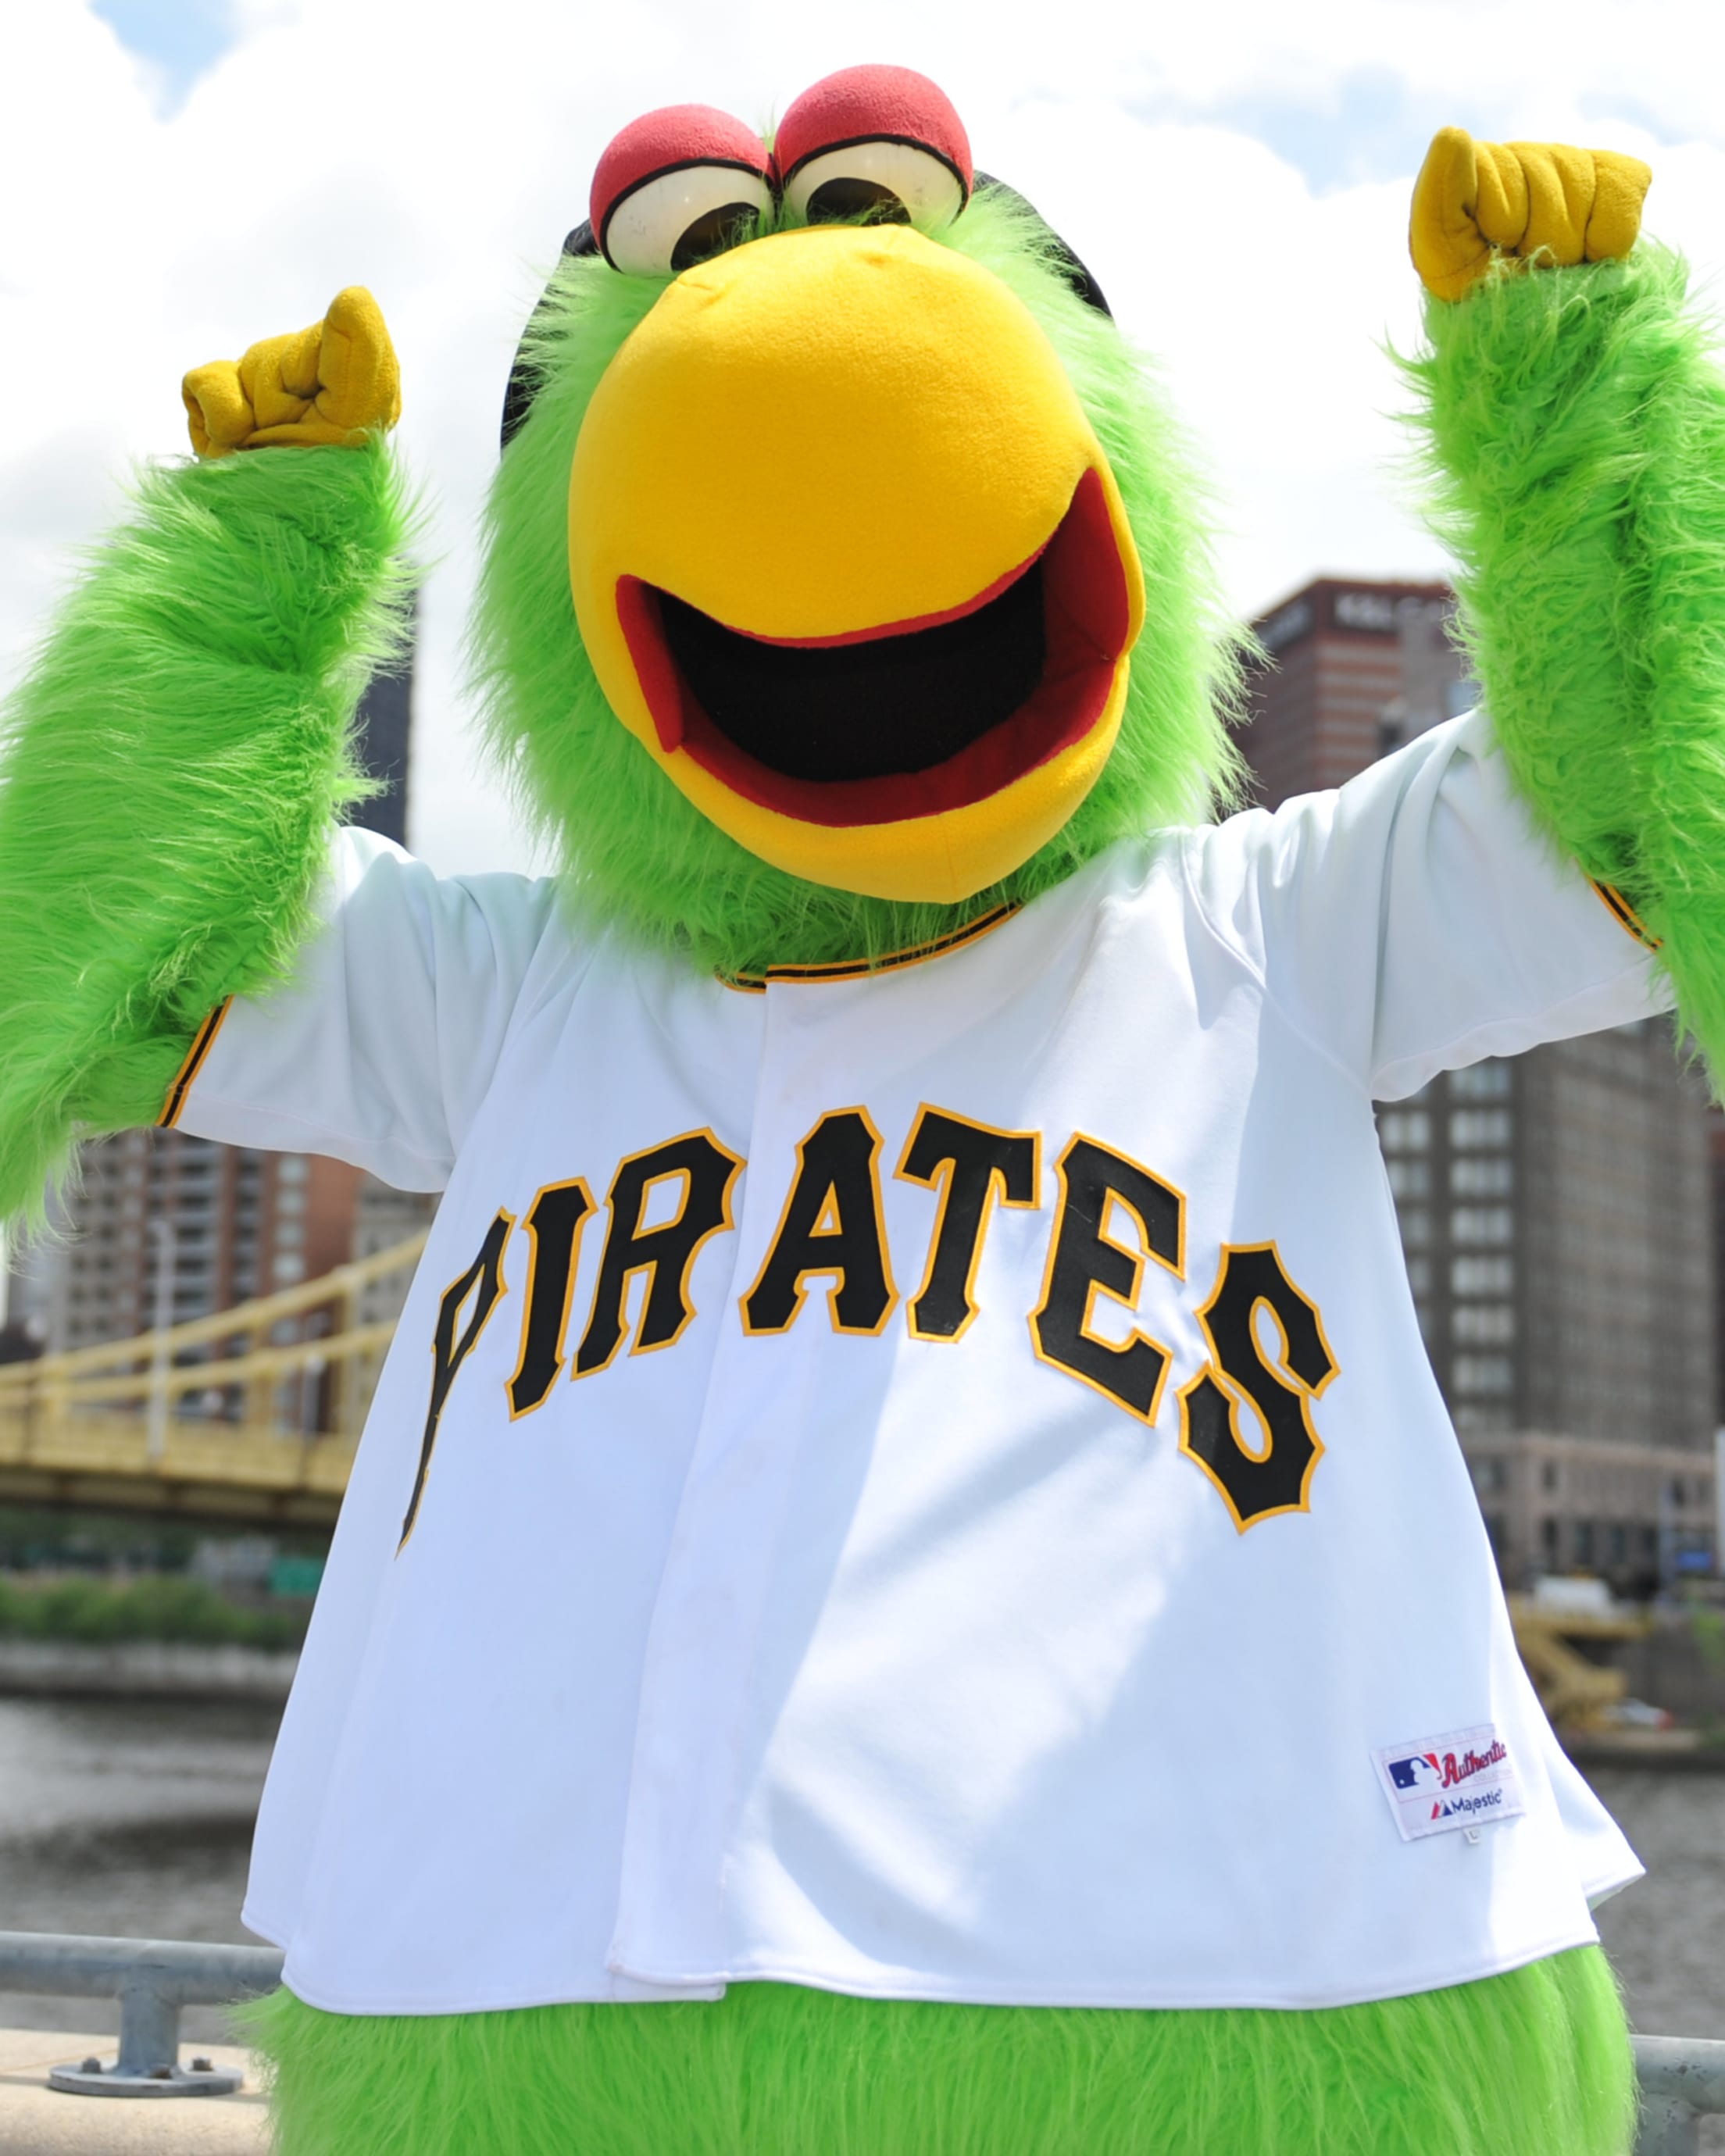 Pittsburgh - PNC Park: Pirate Parrot, Pirate Parrot, the ma…